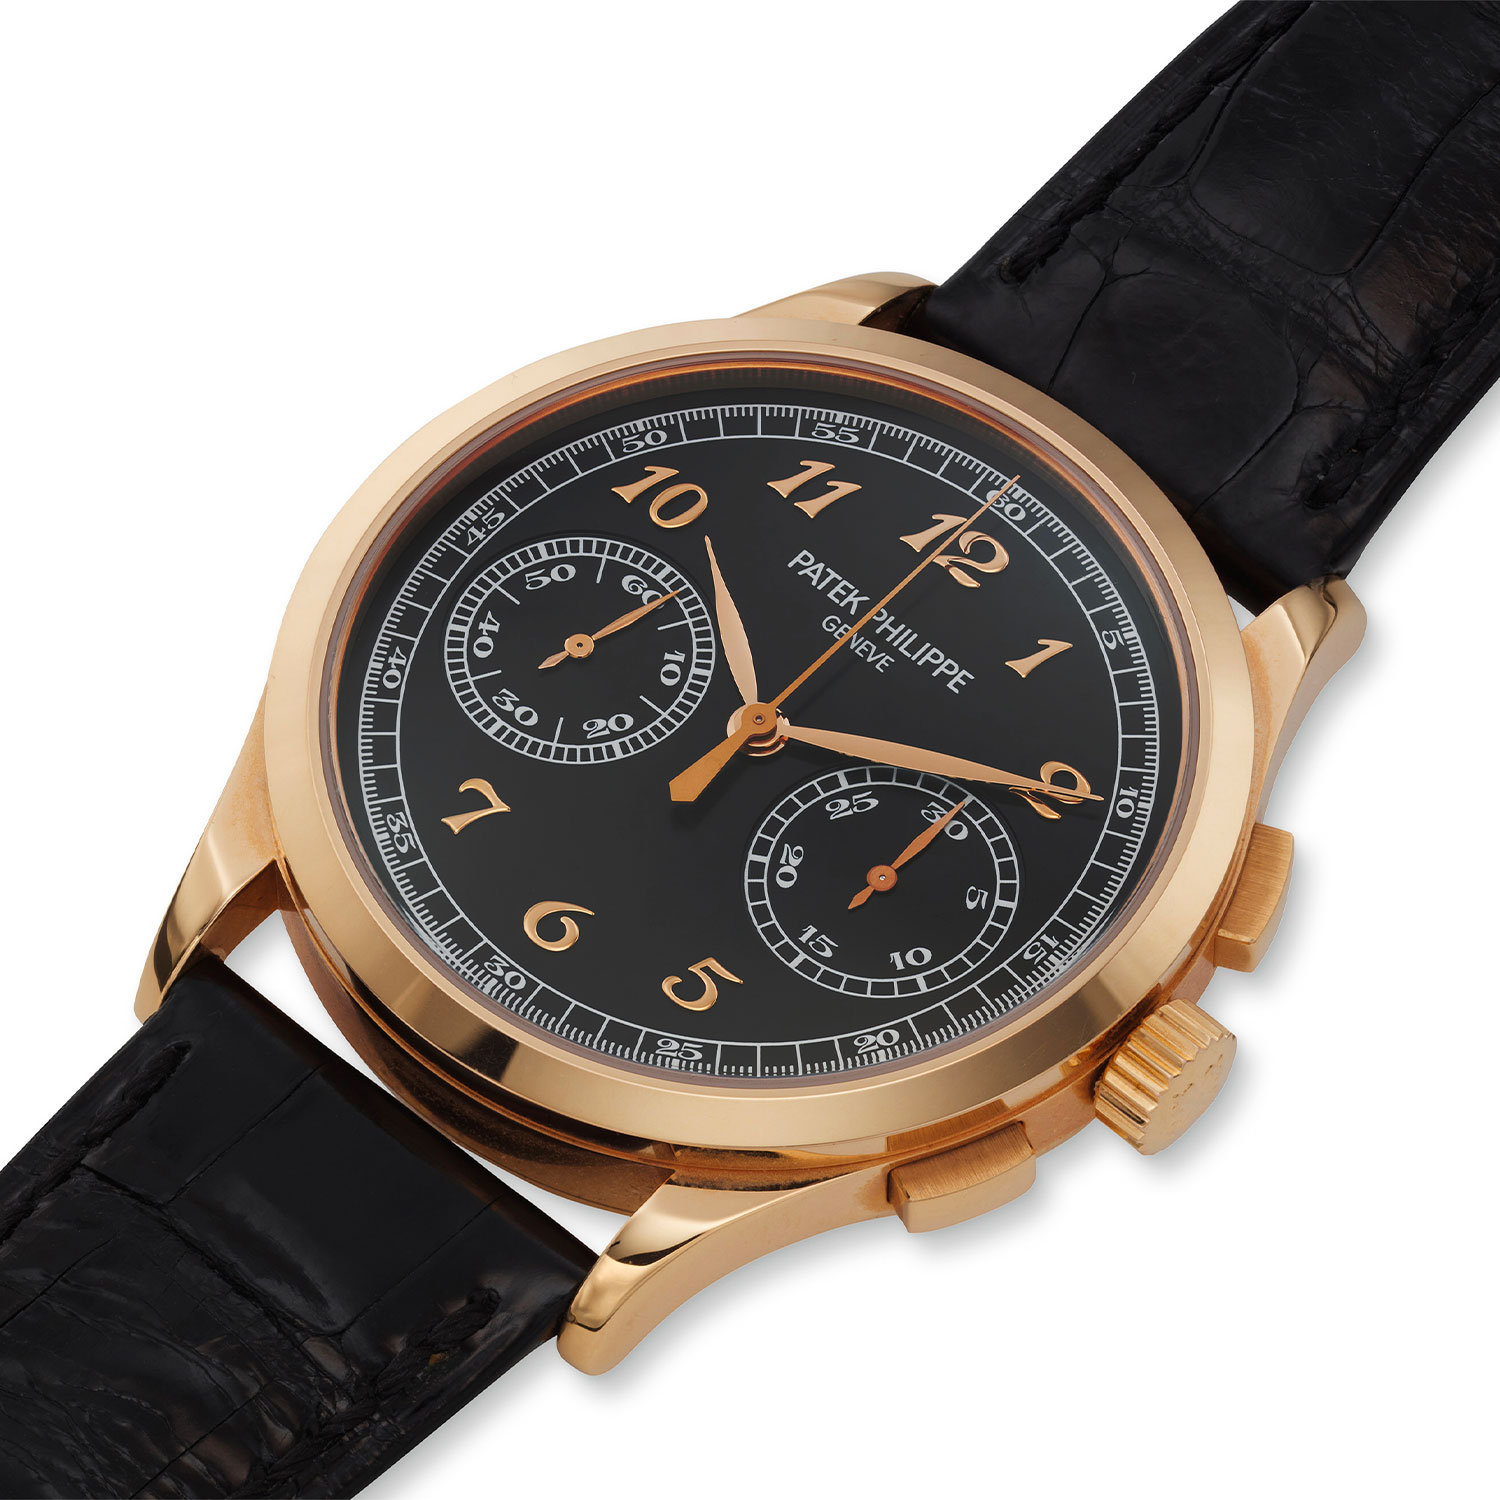 PATEK PHILIPPE CHRONOGRAPH REF. 5170R-010 - Collectability